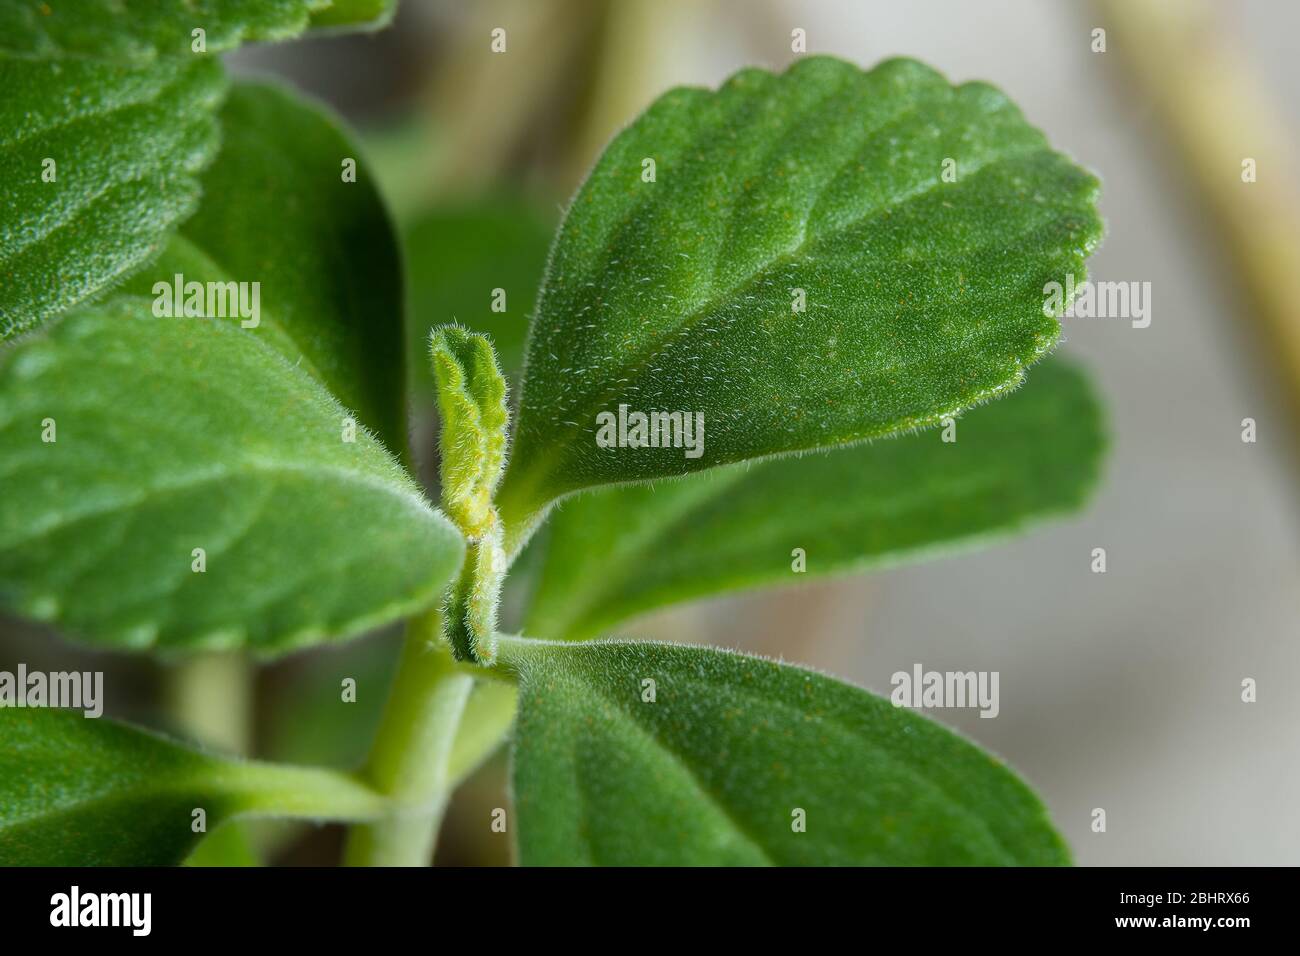 Growing Boldo plant. Green plant with medicinal powers. Stock Photo